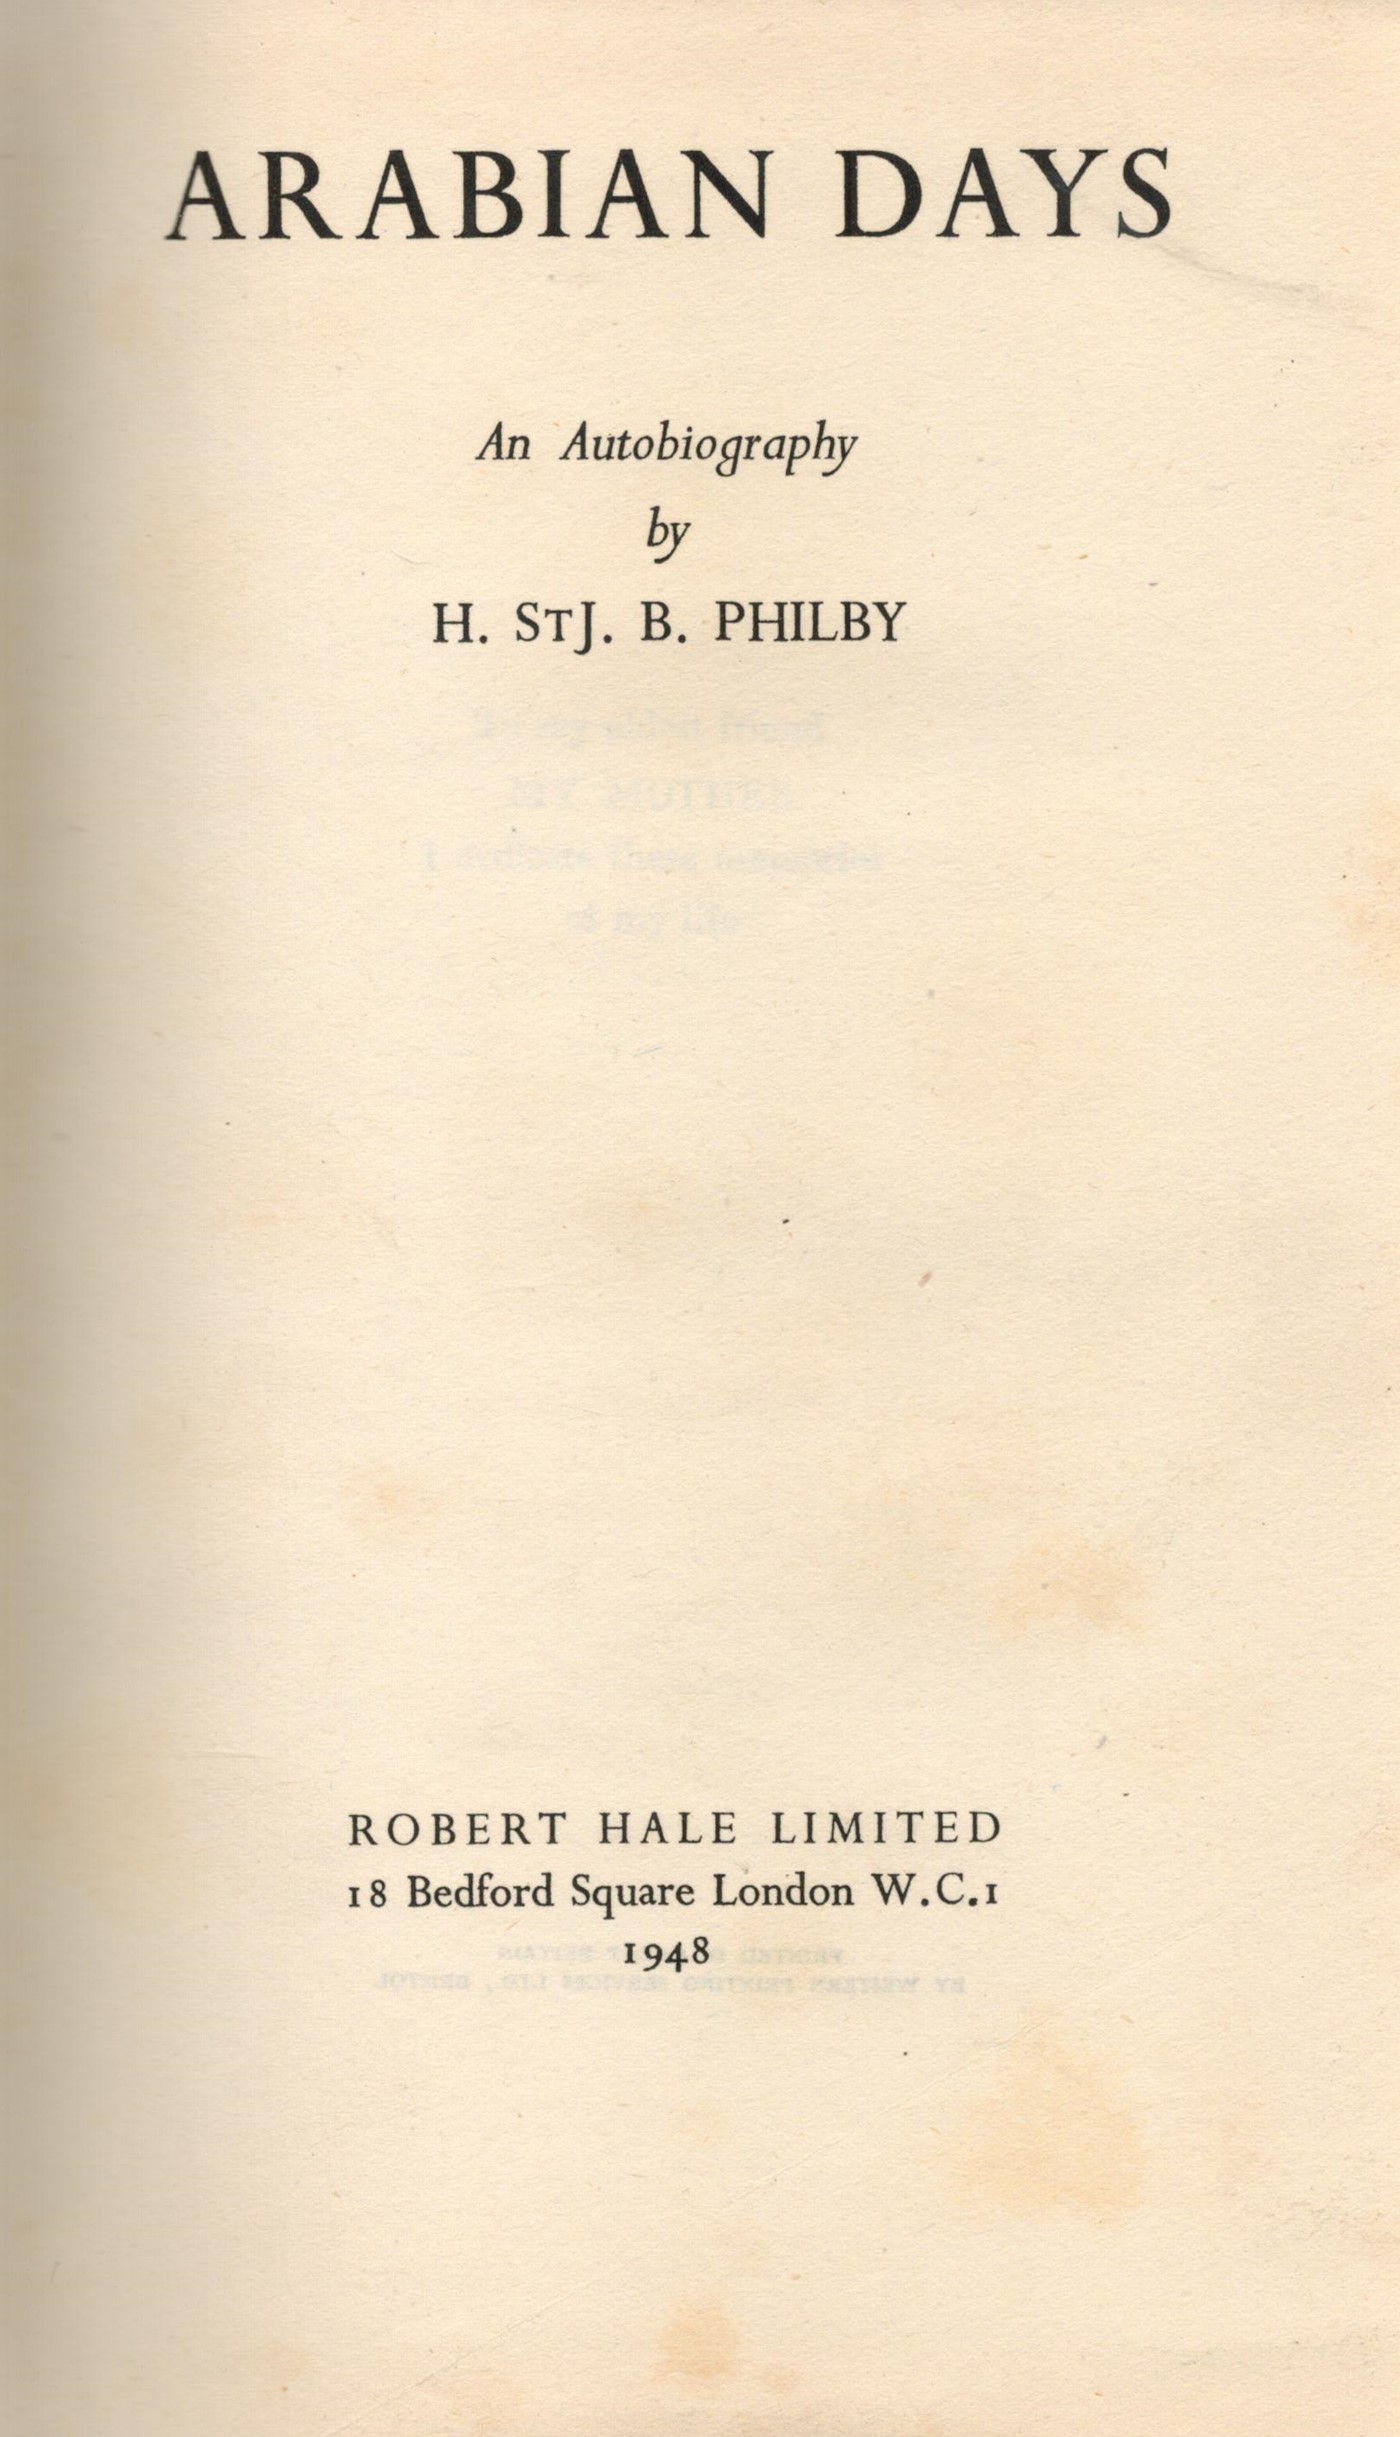 Arabian Days An Autobiography by H Stj B Philby Hardback Book 1948 First Edition published by Robert - Image 2 of 2